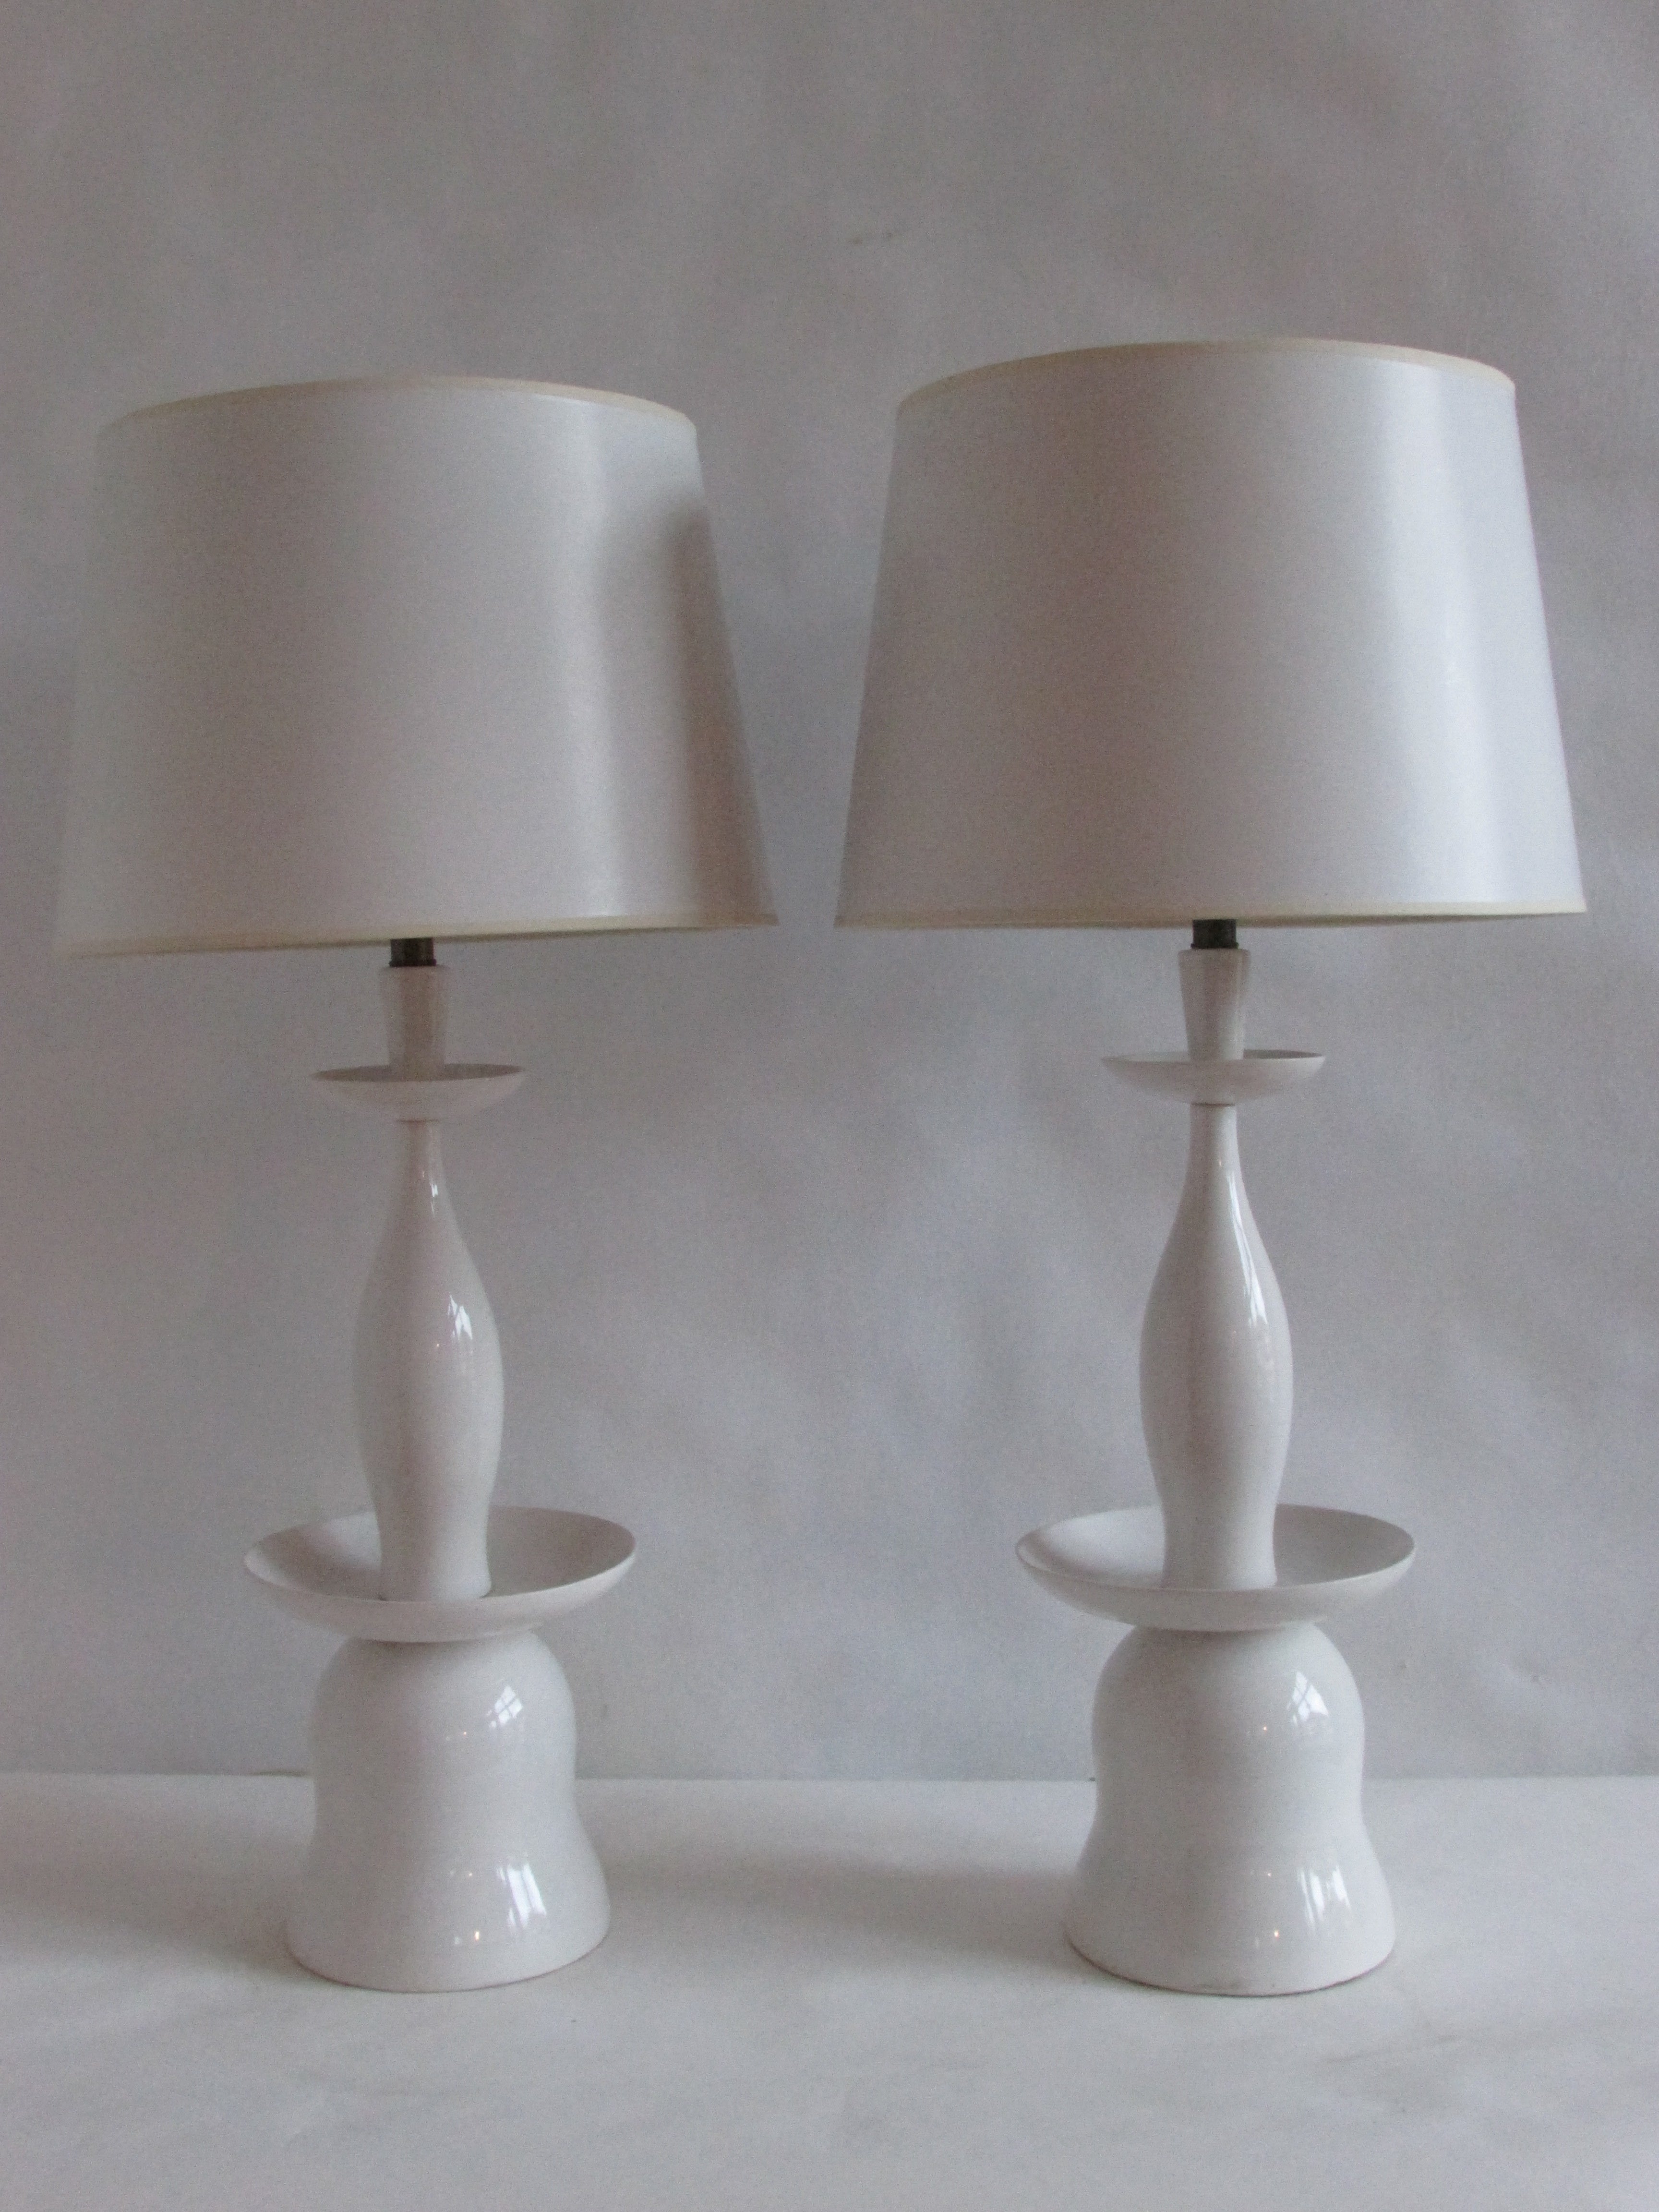 White Porcelain Pagoda Form Lamps